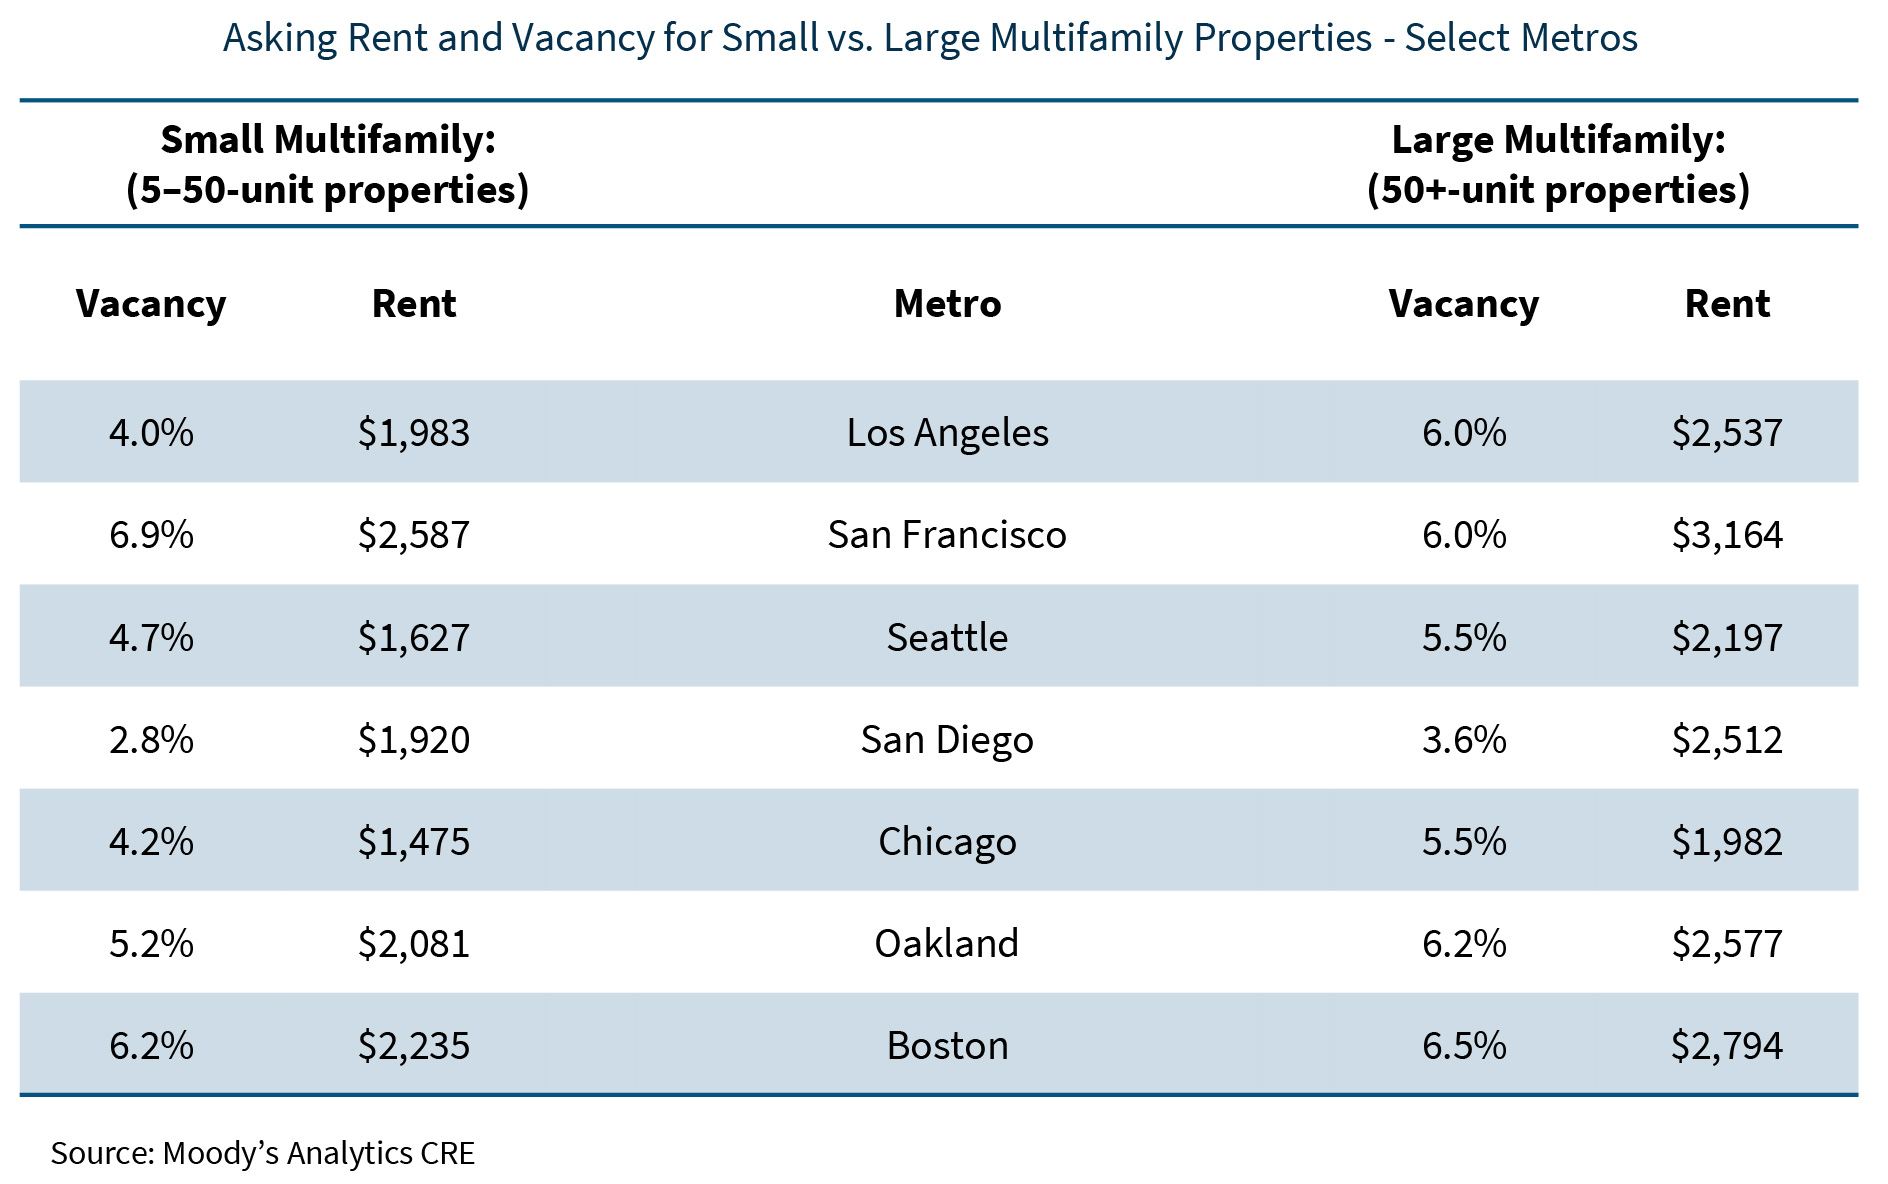 Asking Rent and Vacancy for Small vs. Large Multifamily Properties - Select Metros